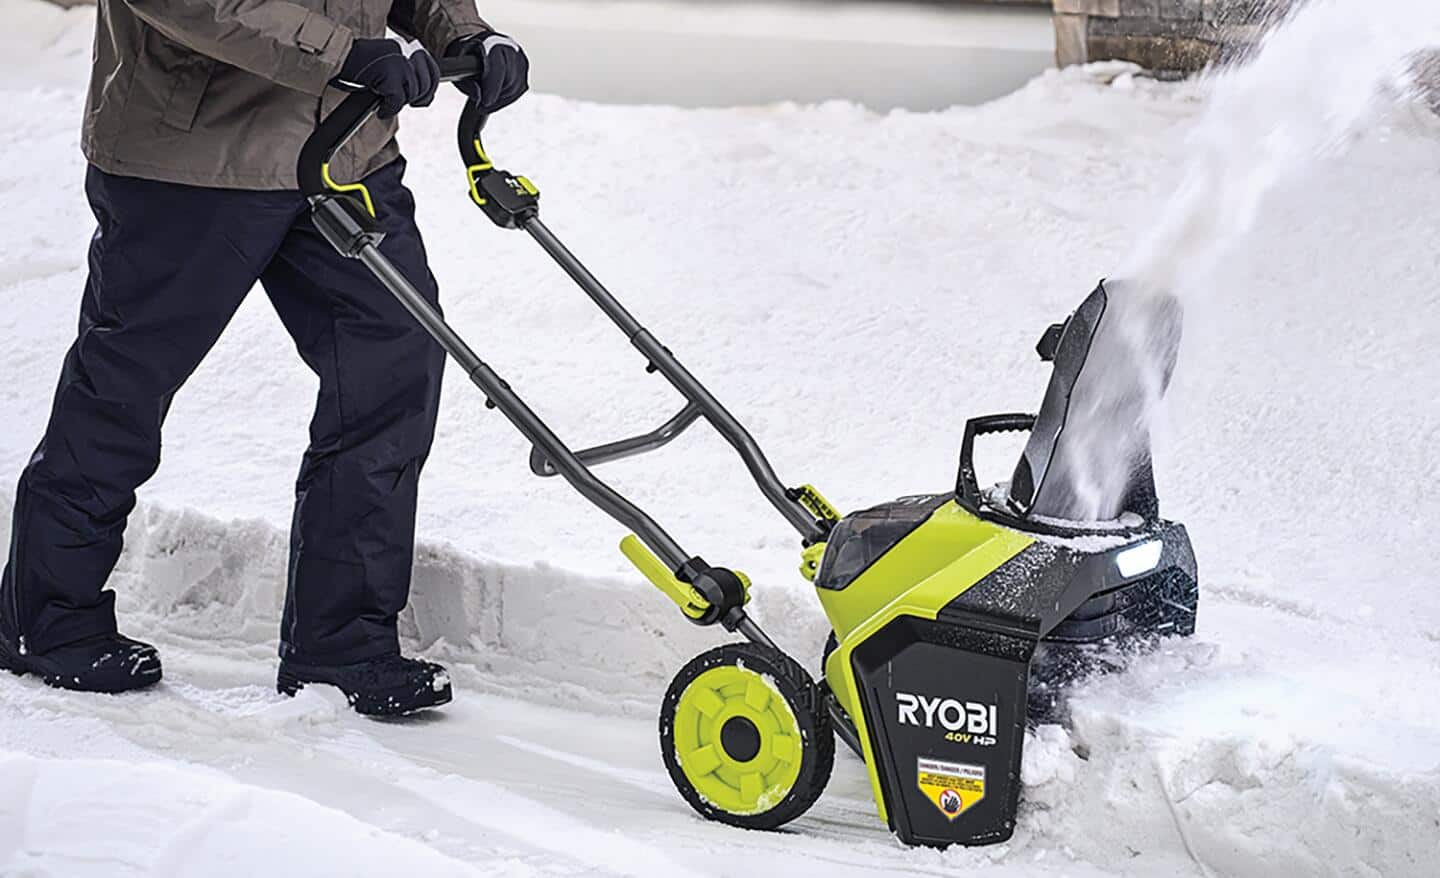 A person using a green single-stage snow blower to clear a snowdrift.